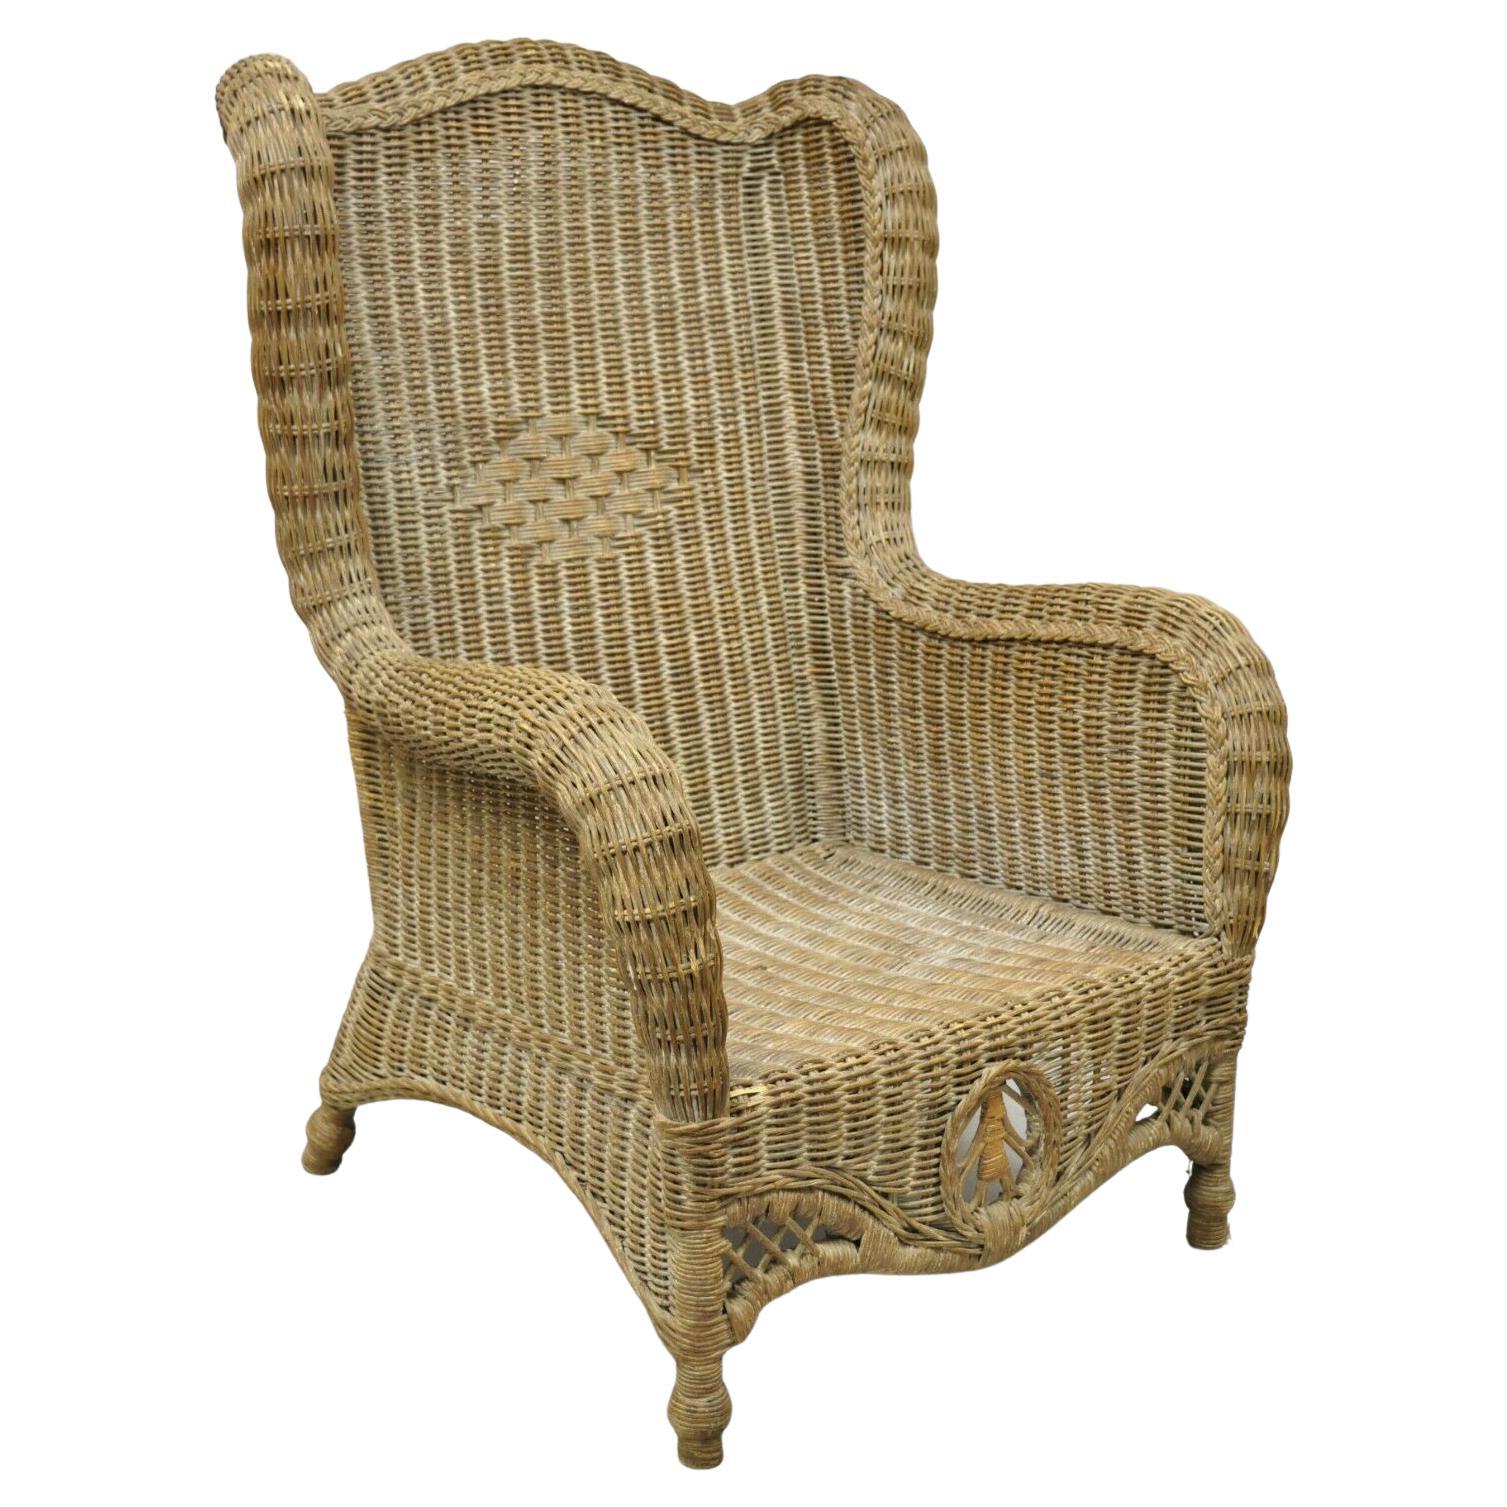 Large Woven Wicker Rattan Victorian Style Wingback Lounge Arm Chair For Sale